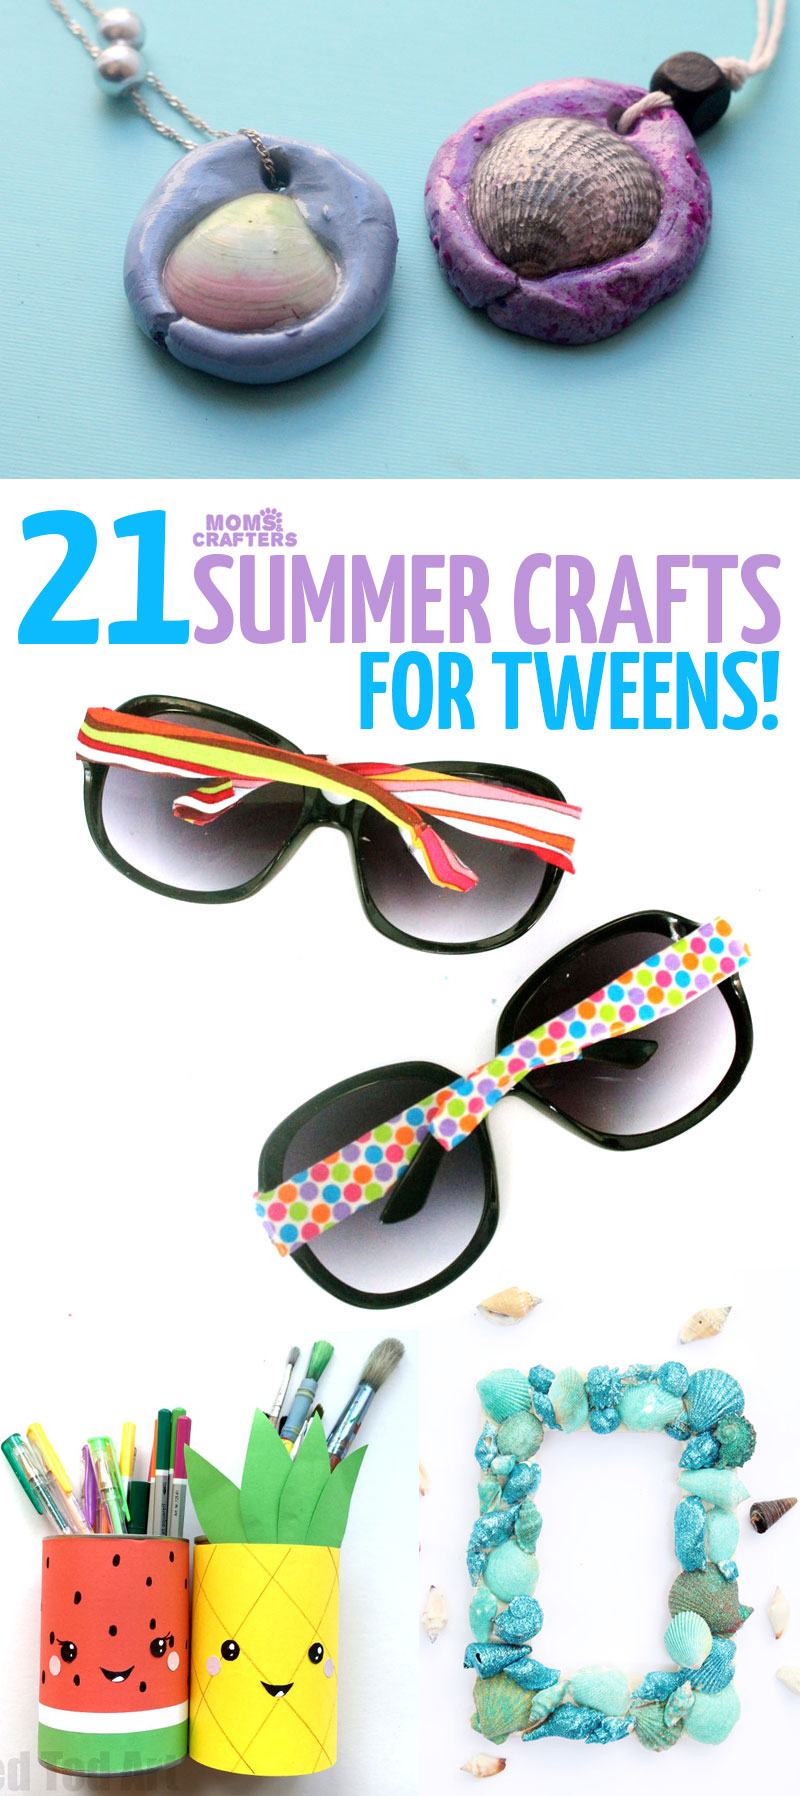 25 Summer Activities for Girls  Activities for girls, Crafts for